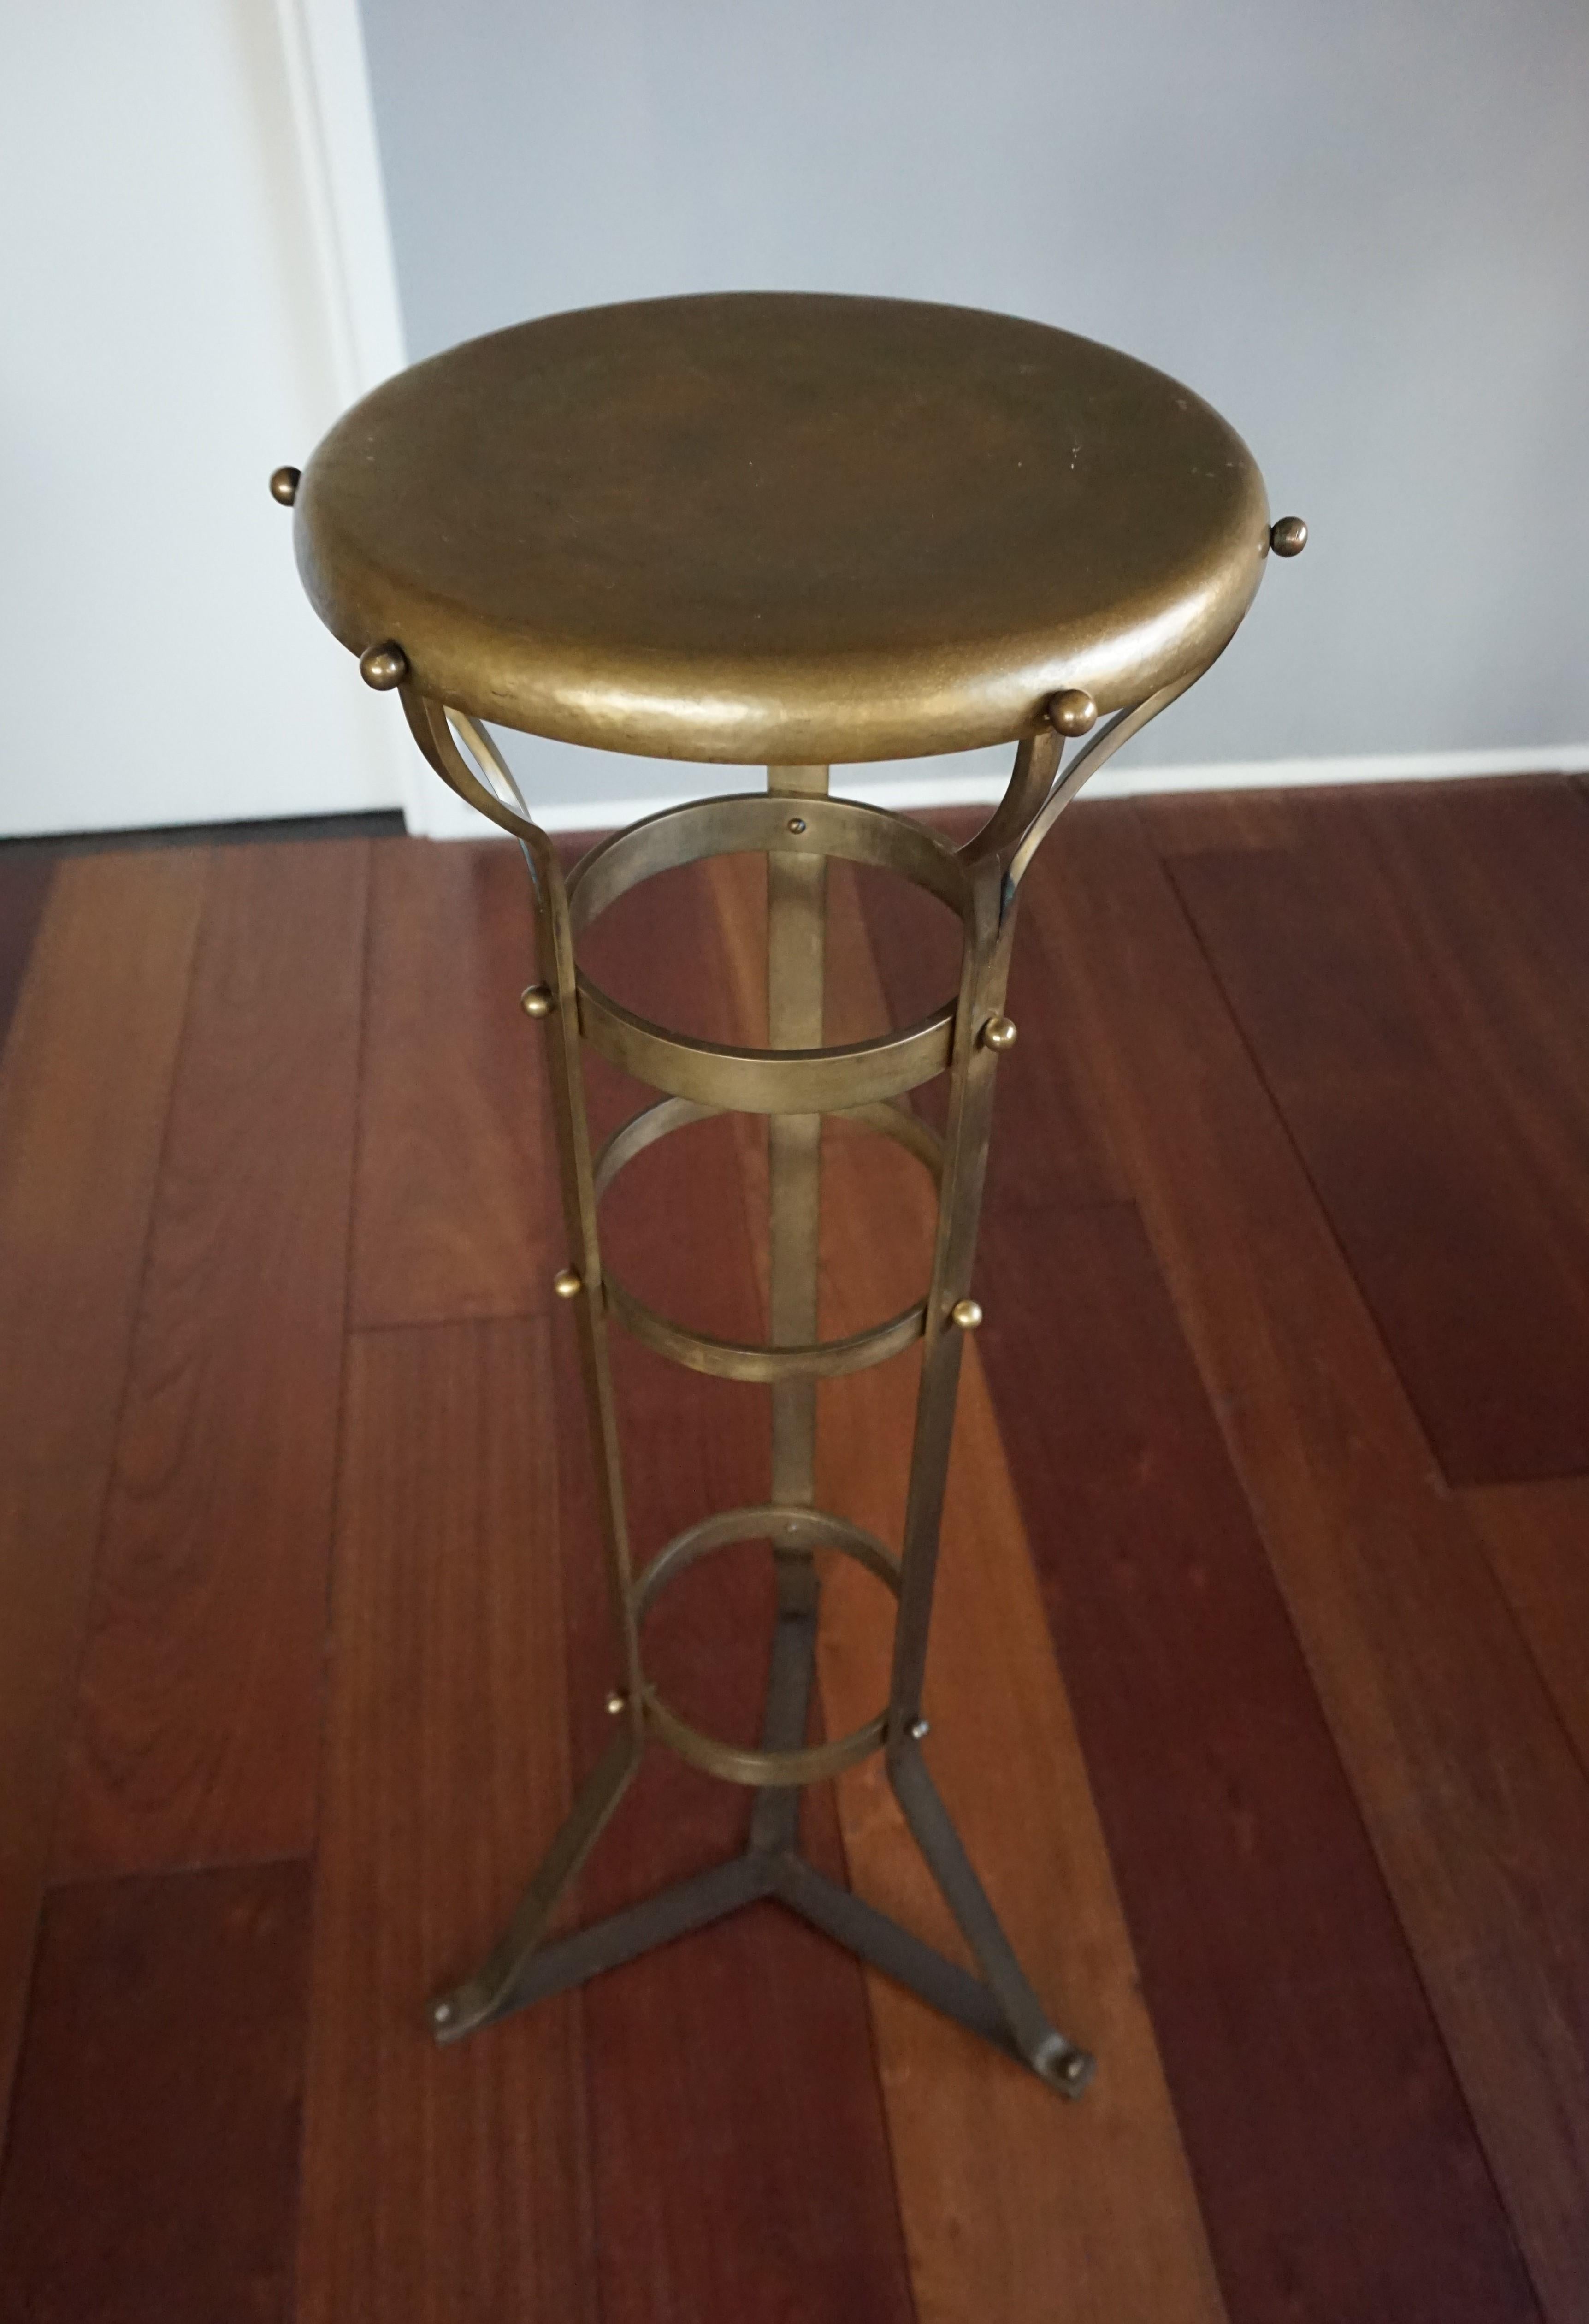 Unique and timeless pedestal stand.

When it comes to Arts & Crafts pedestals this particular piece could very well be the most handsome and stylish we ever had the pleasure of offering. Hand-crafted out of thick, strong and solid brass this weighty